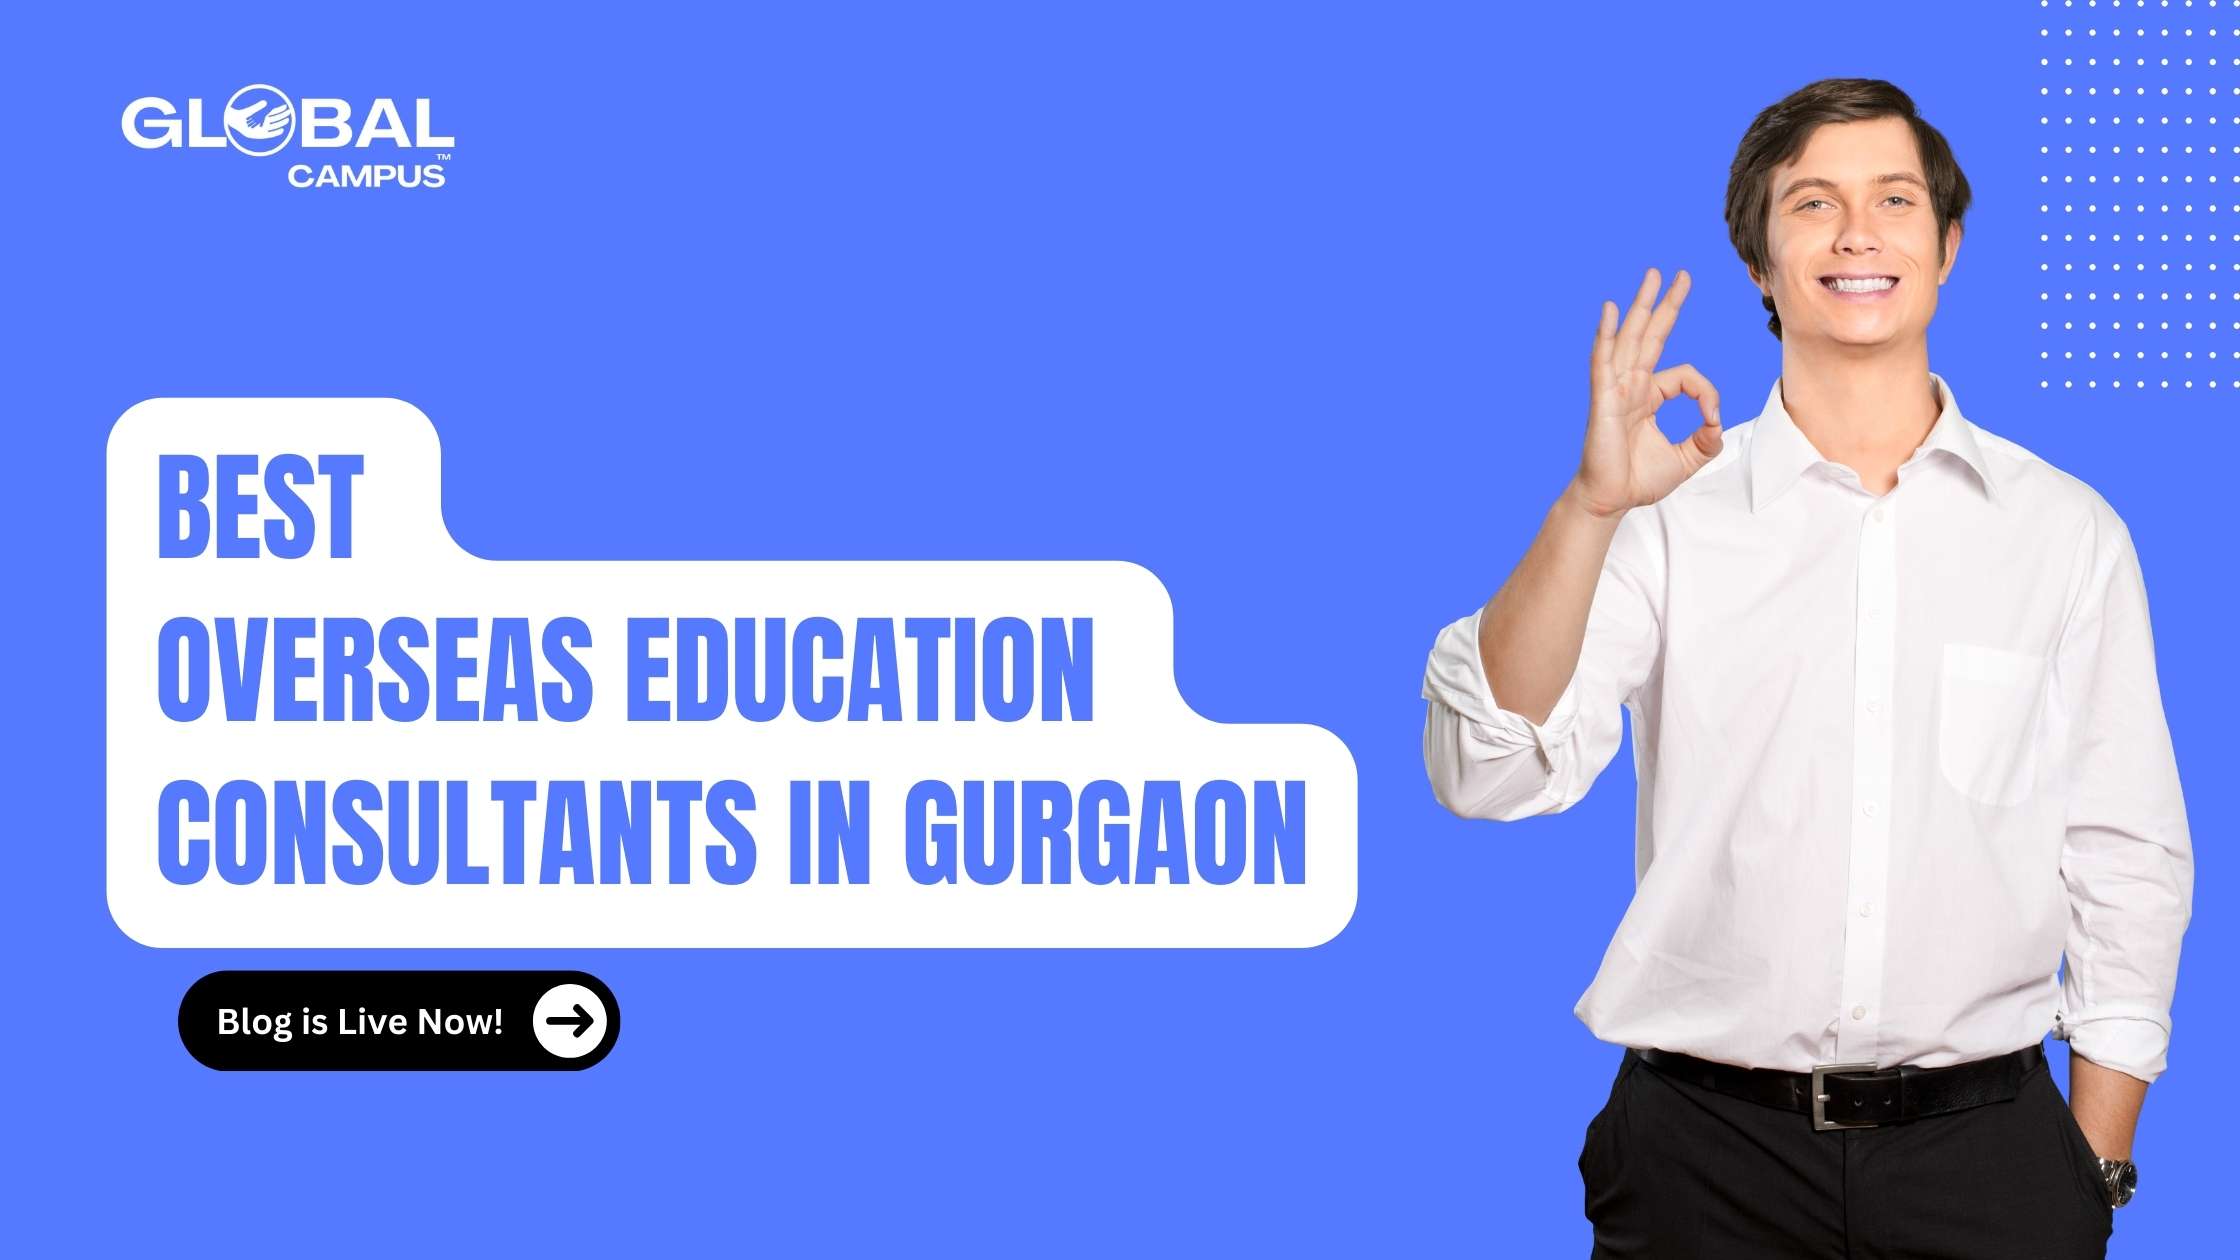 A person appreciating Global Campus as Best Overseas Education Consultants in Gurugram